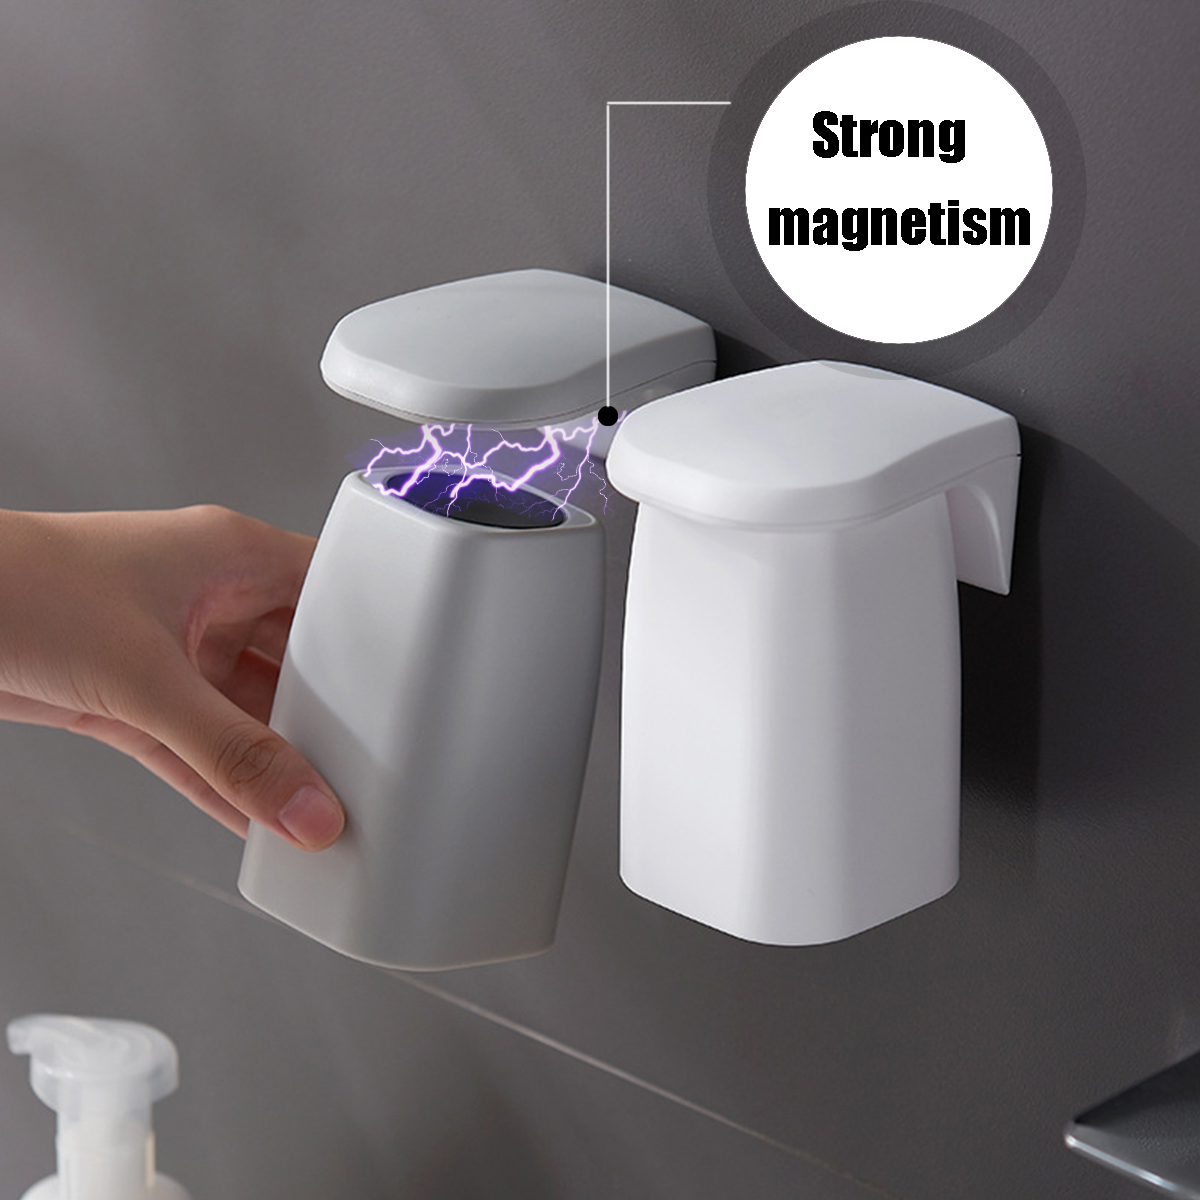 Solar-Charging-Infrared-Toothbrush-Sterilizer-Holder-Automatic-Toothpaste-Dispenser-Magnetic-Suction-1622988-6